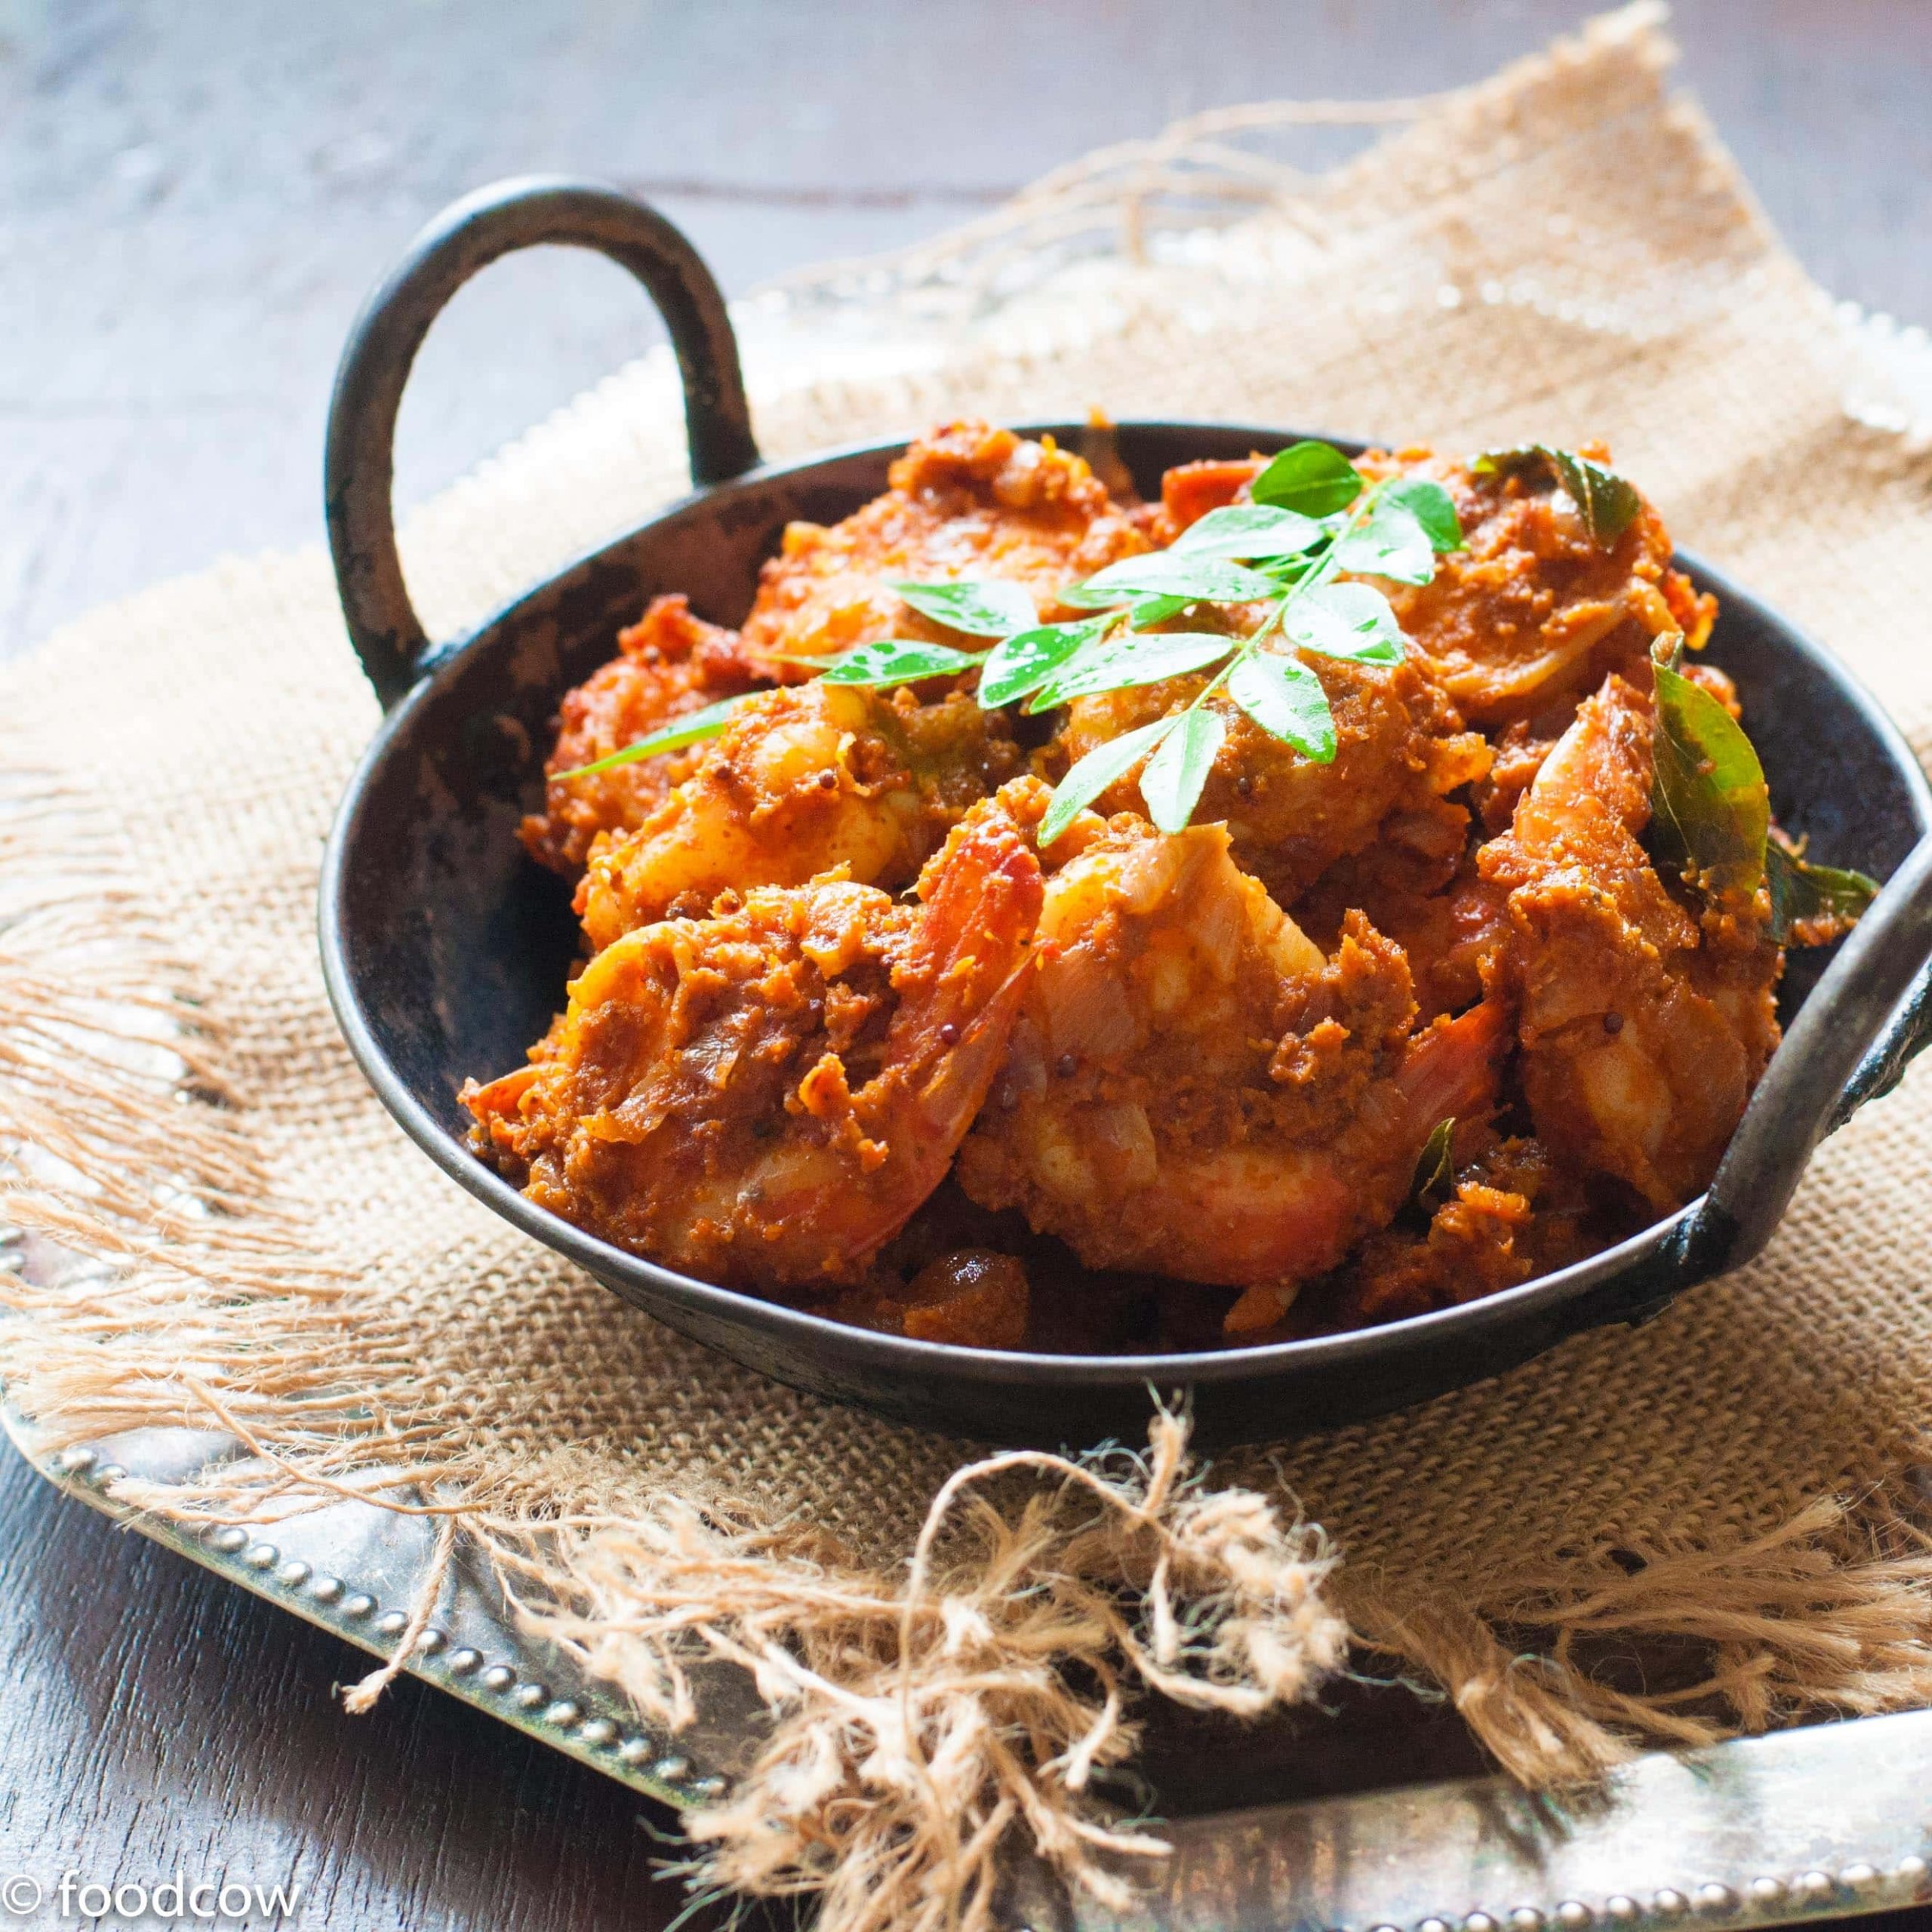 Mangalorean Prawn Sukka - A spicy, tangy Prawn roast from the west coast of india made with chillies,tamarind and fresh coconut.